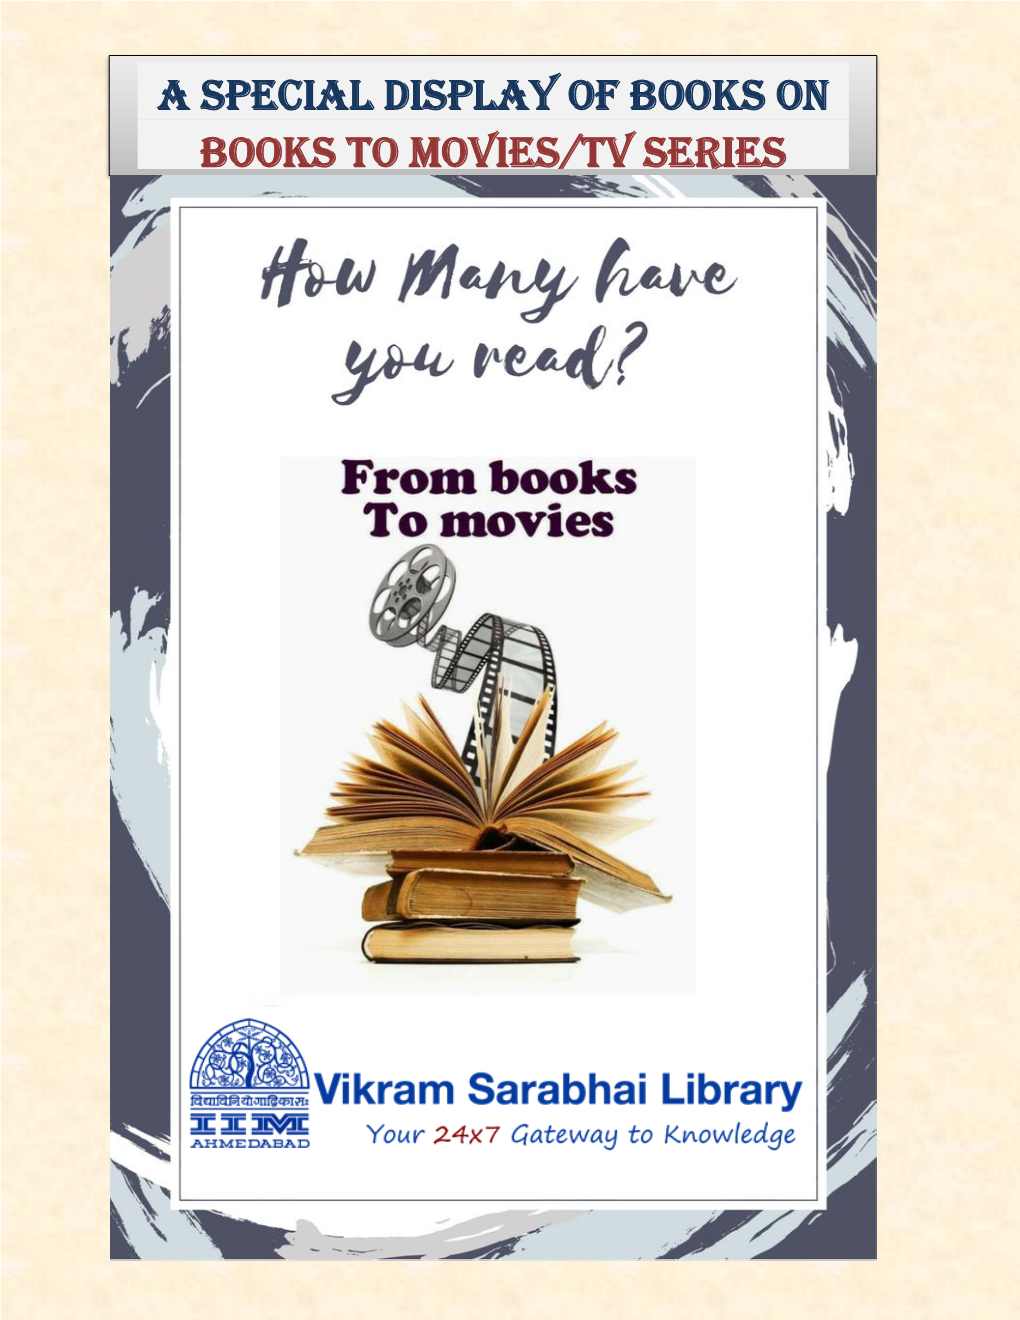 A Special Display of Books on Books to Movies/TV Series Movies Based on Novels (Bollywood) Sr